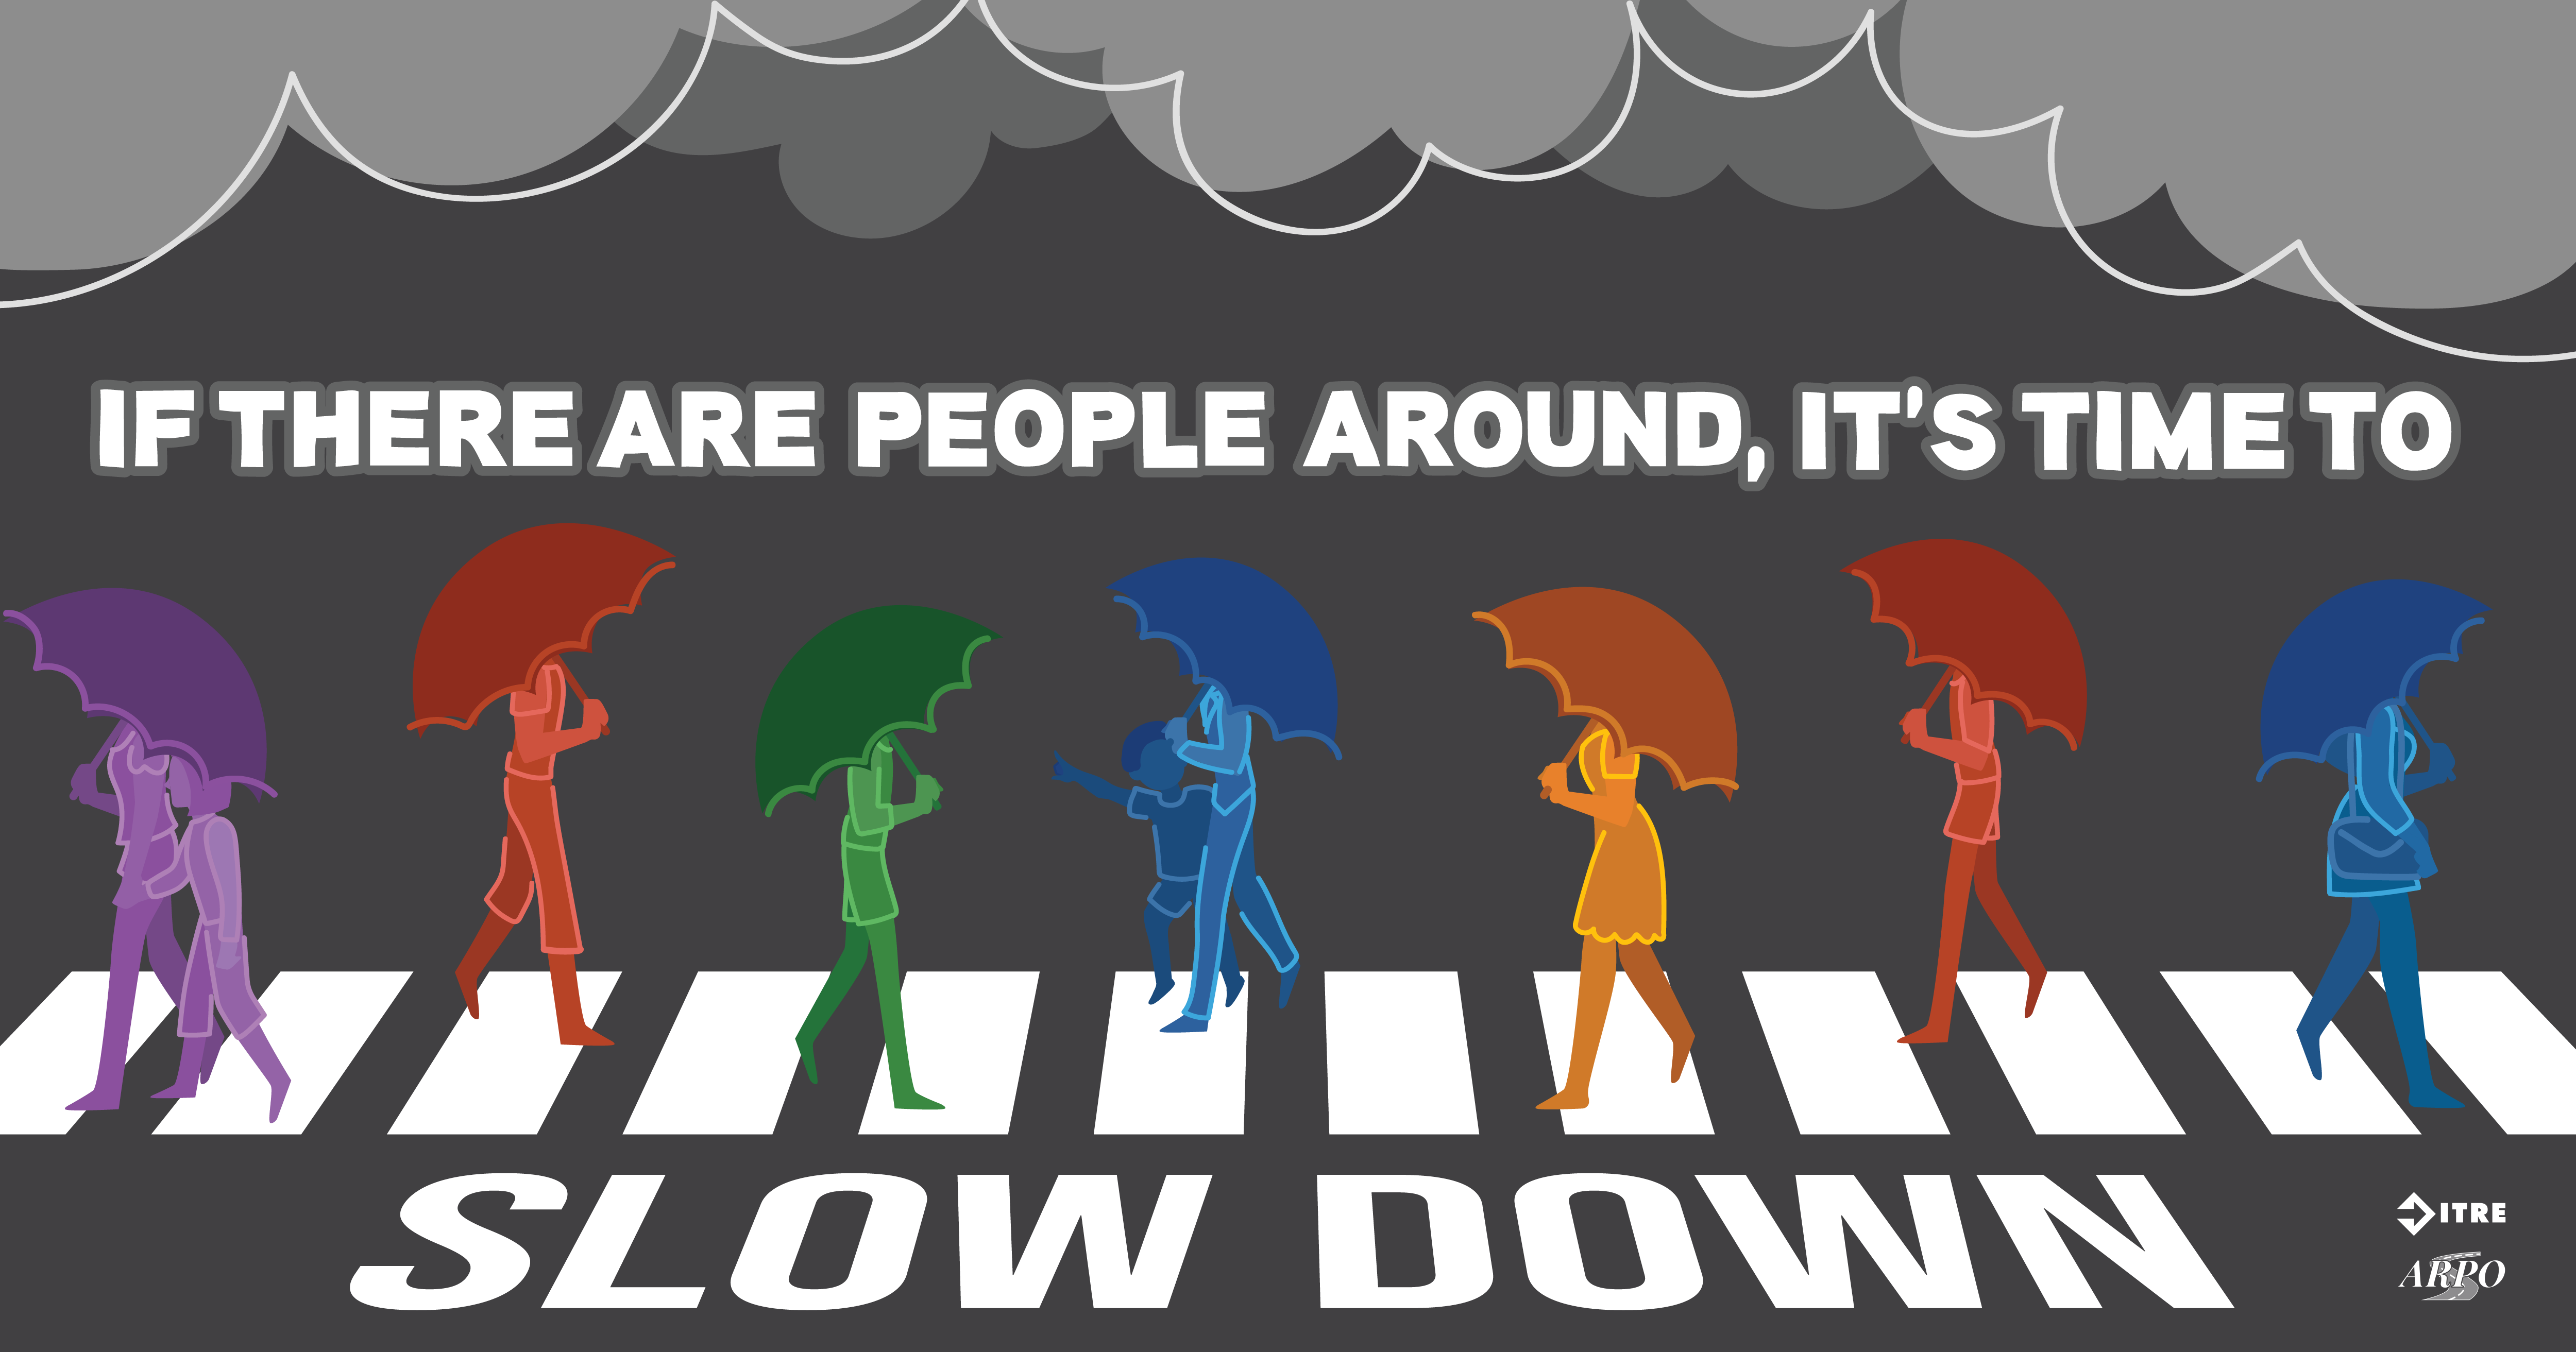 Pedestrians crossing the road in a crosswalk with umbrellas on a gloomy day. Text reads: “If there are people around it’s time to slow down”